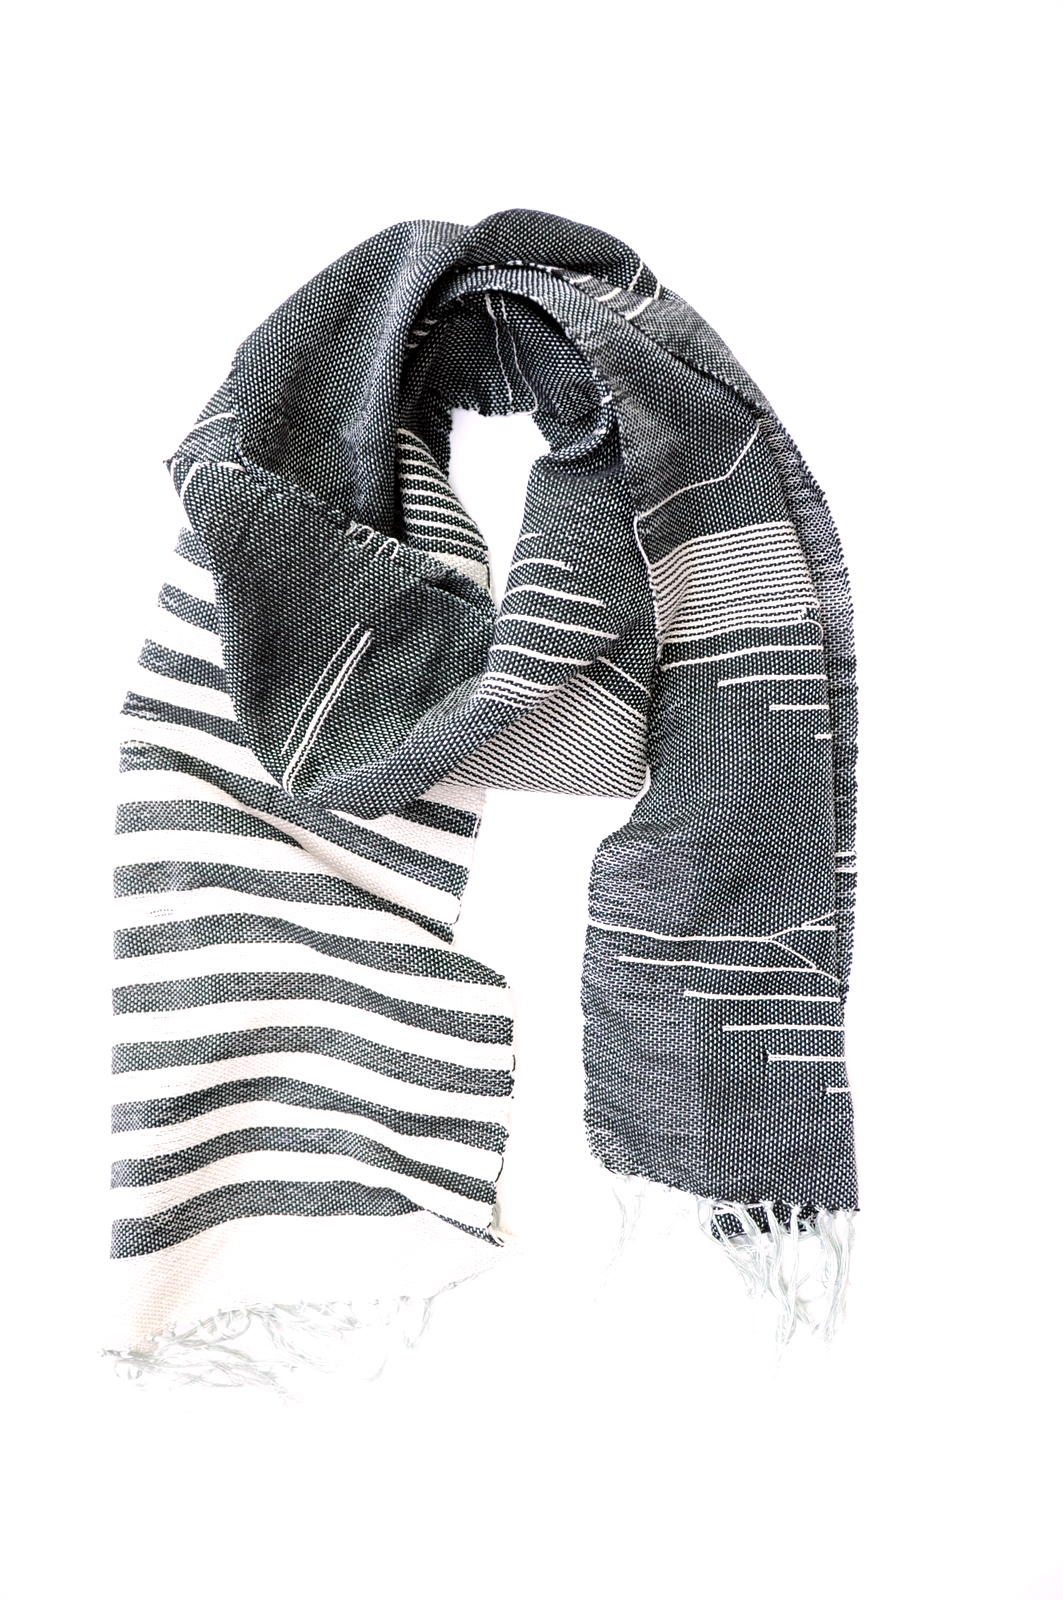 black and white woven cotton scarf for father's day